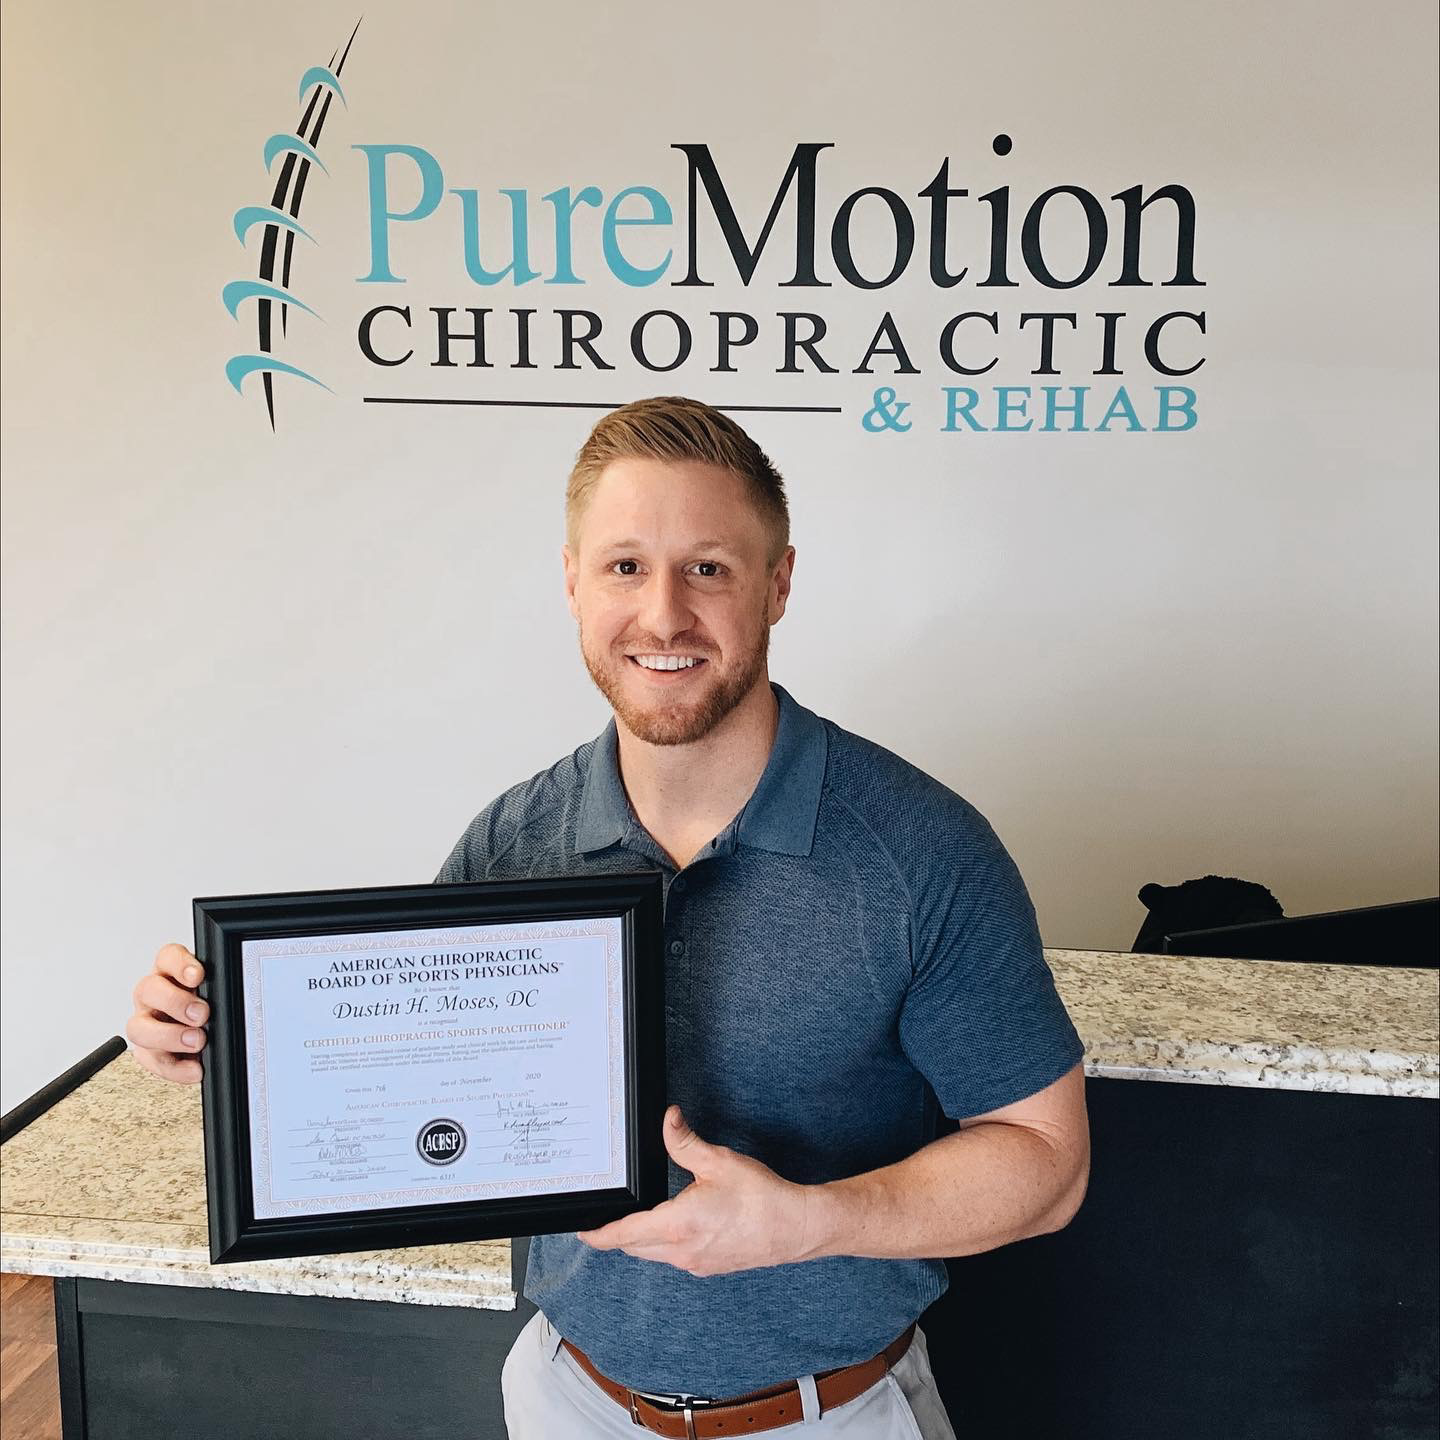 Pure Motion Chiropractic & Rehab